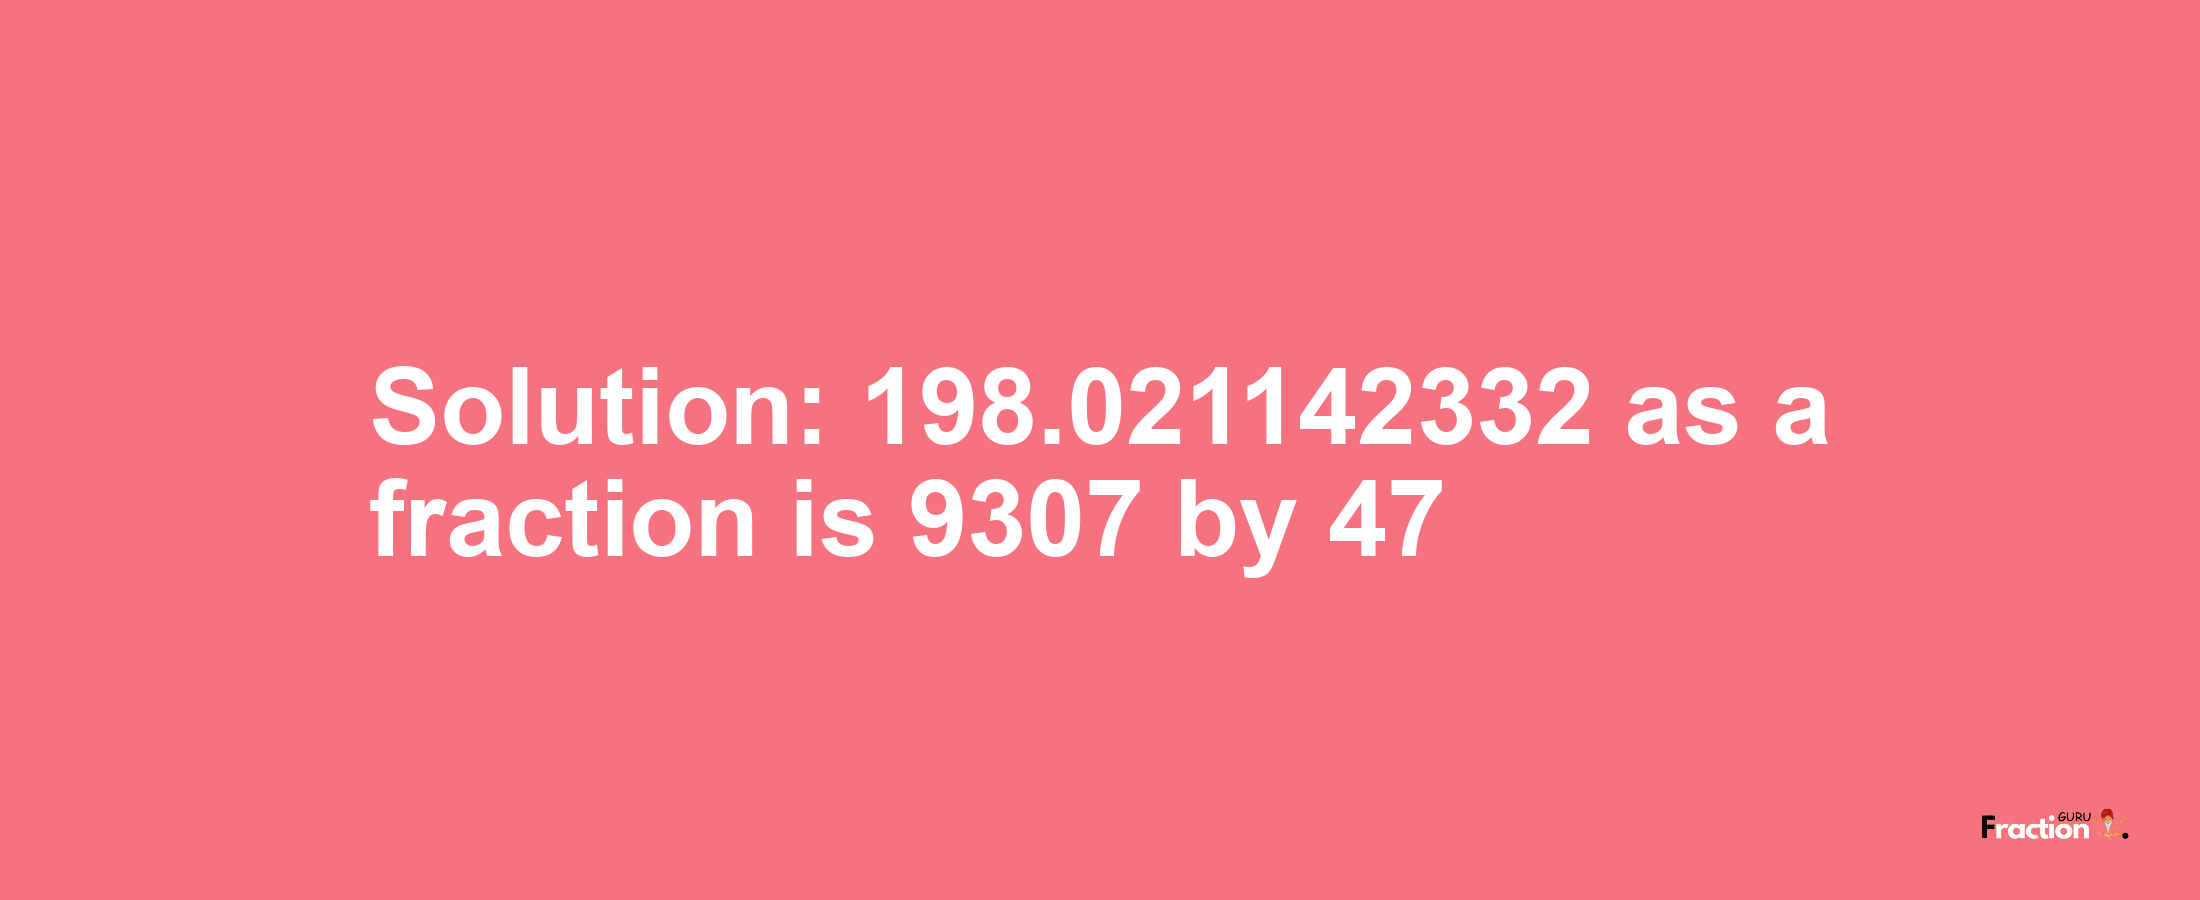 Solution:198.021142332 as a fraction is 9307/47